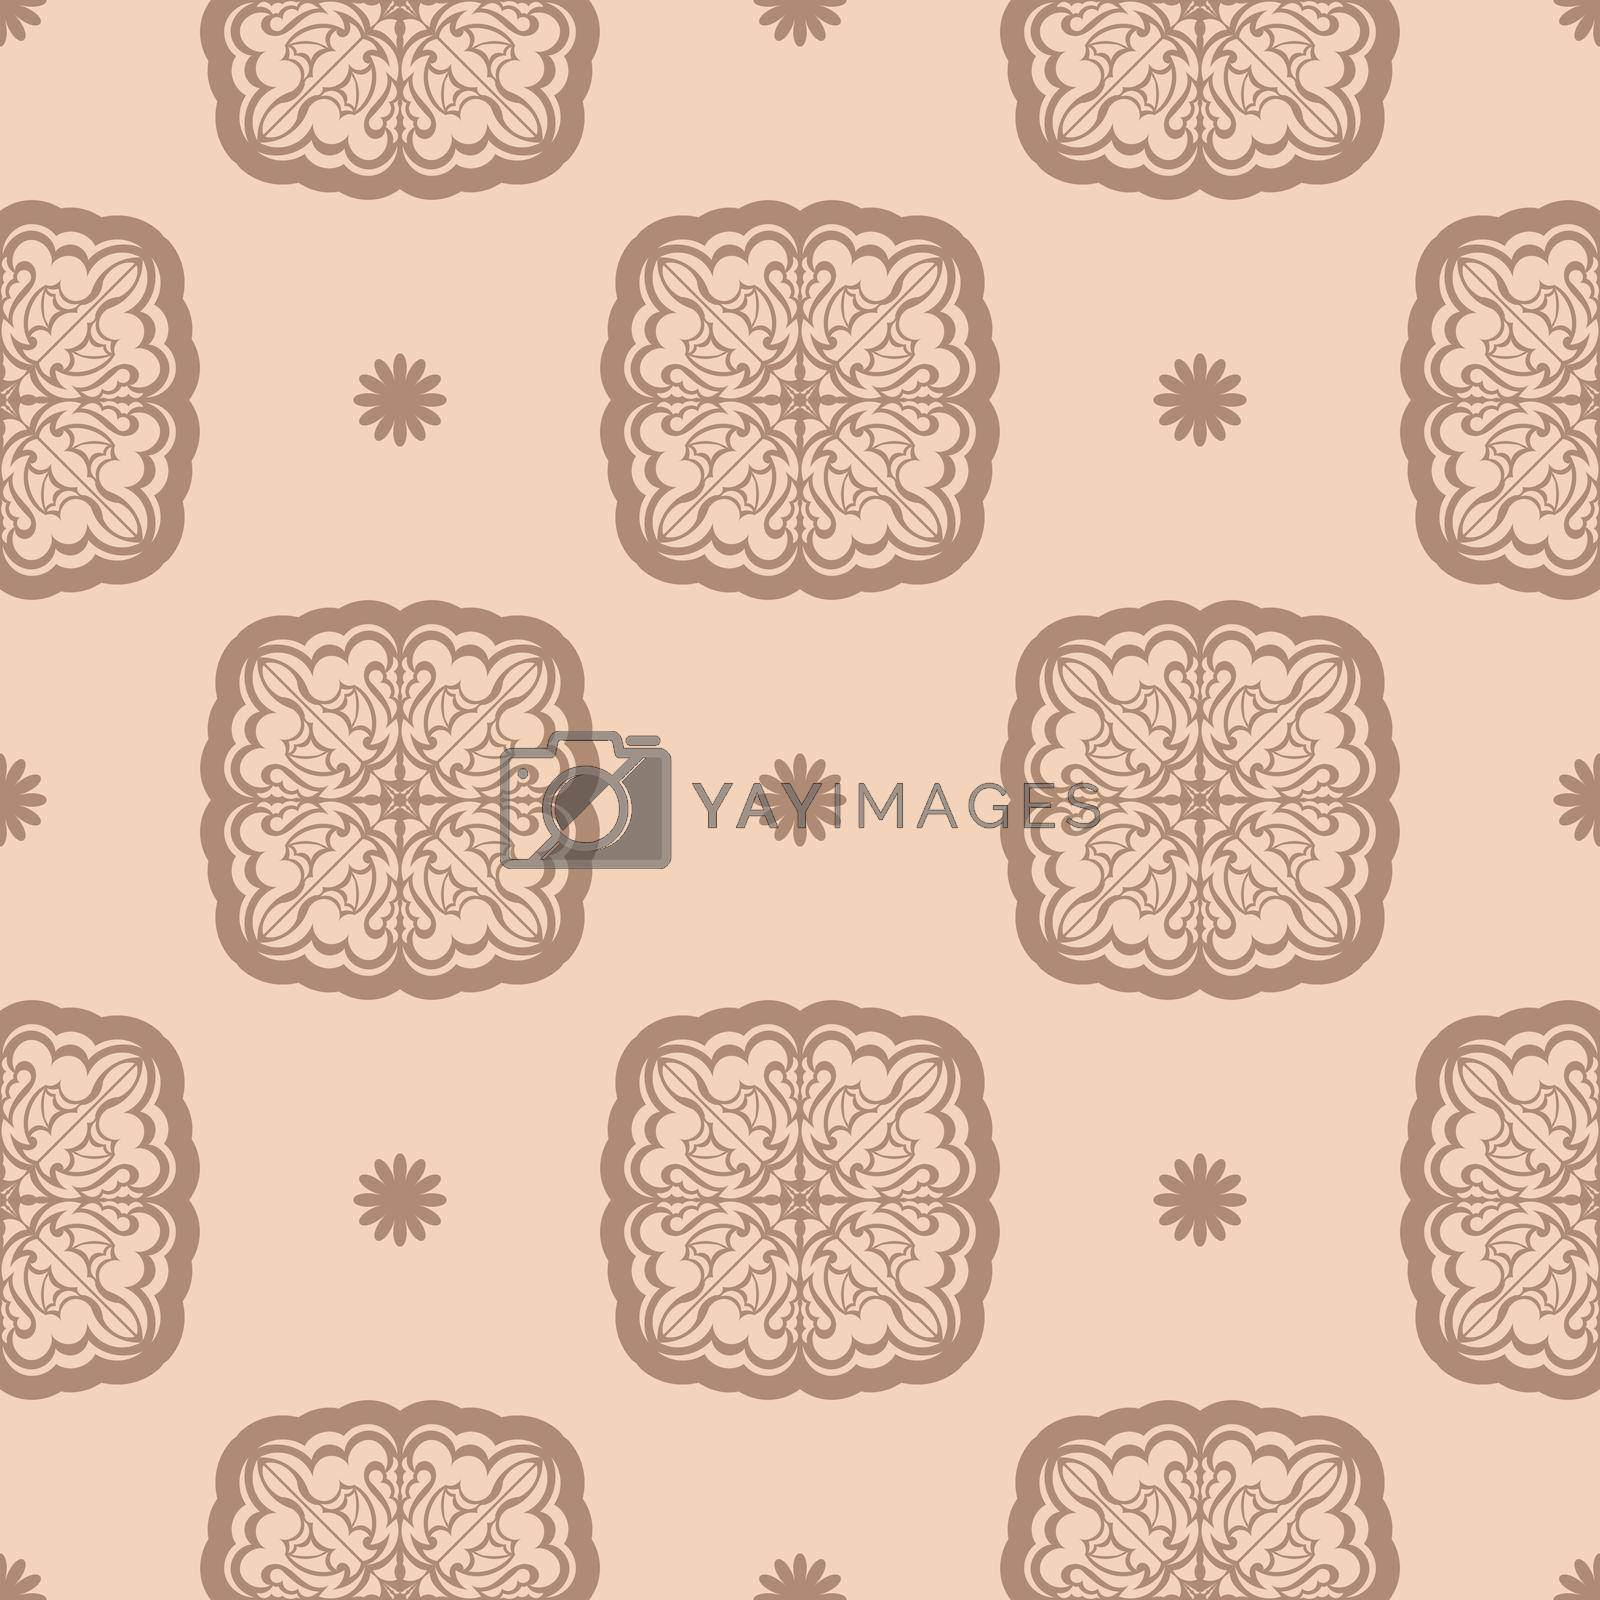 Seamless geometric line pattern in eastern or arabic style. Good for backgrounds and prints. Vector illustration.